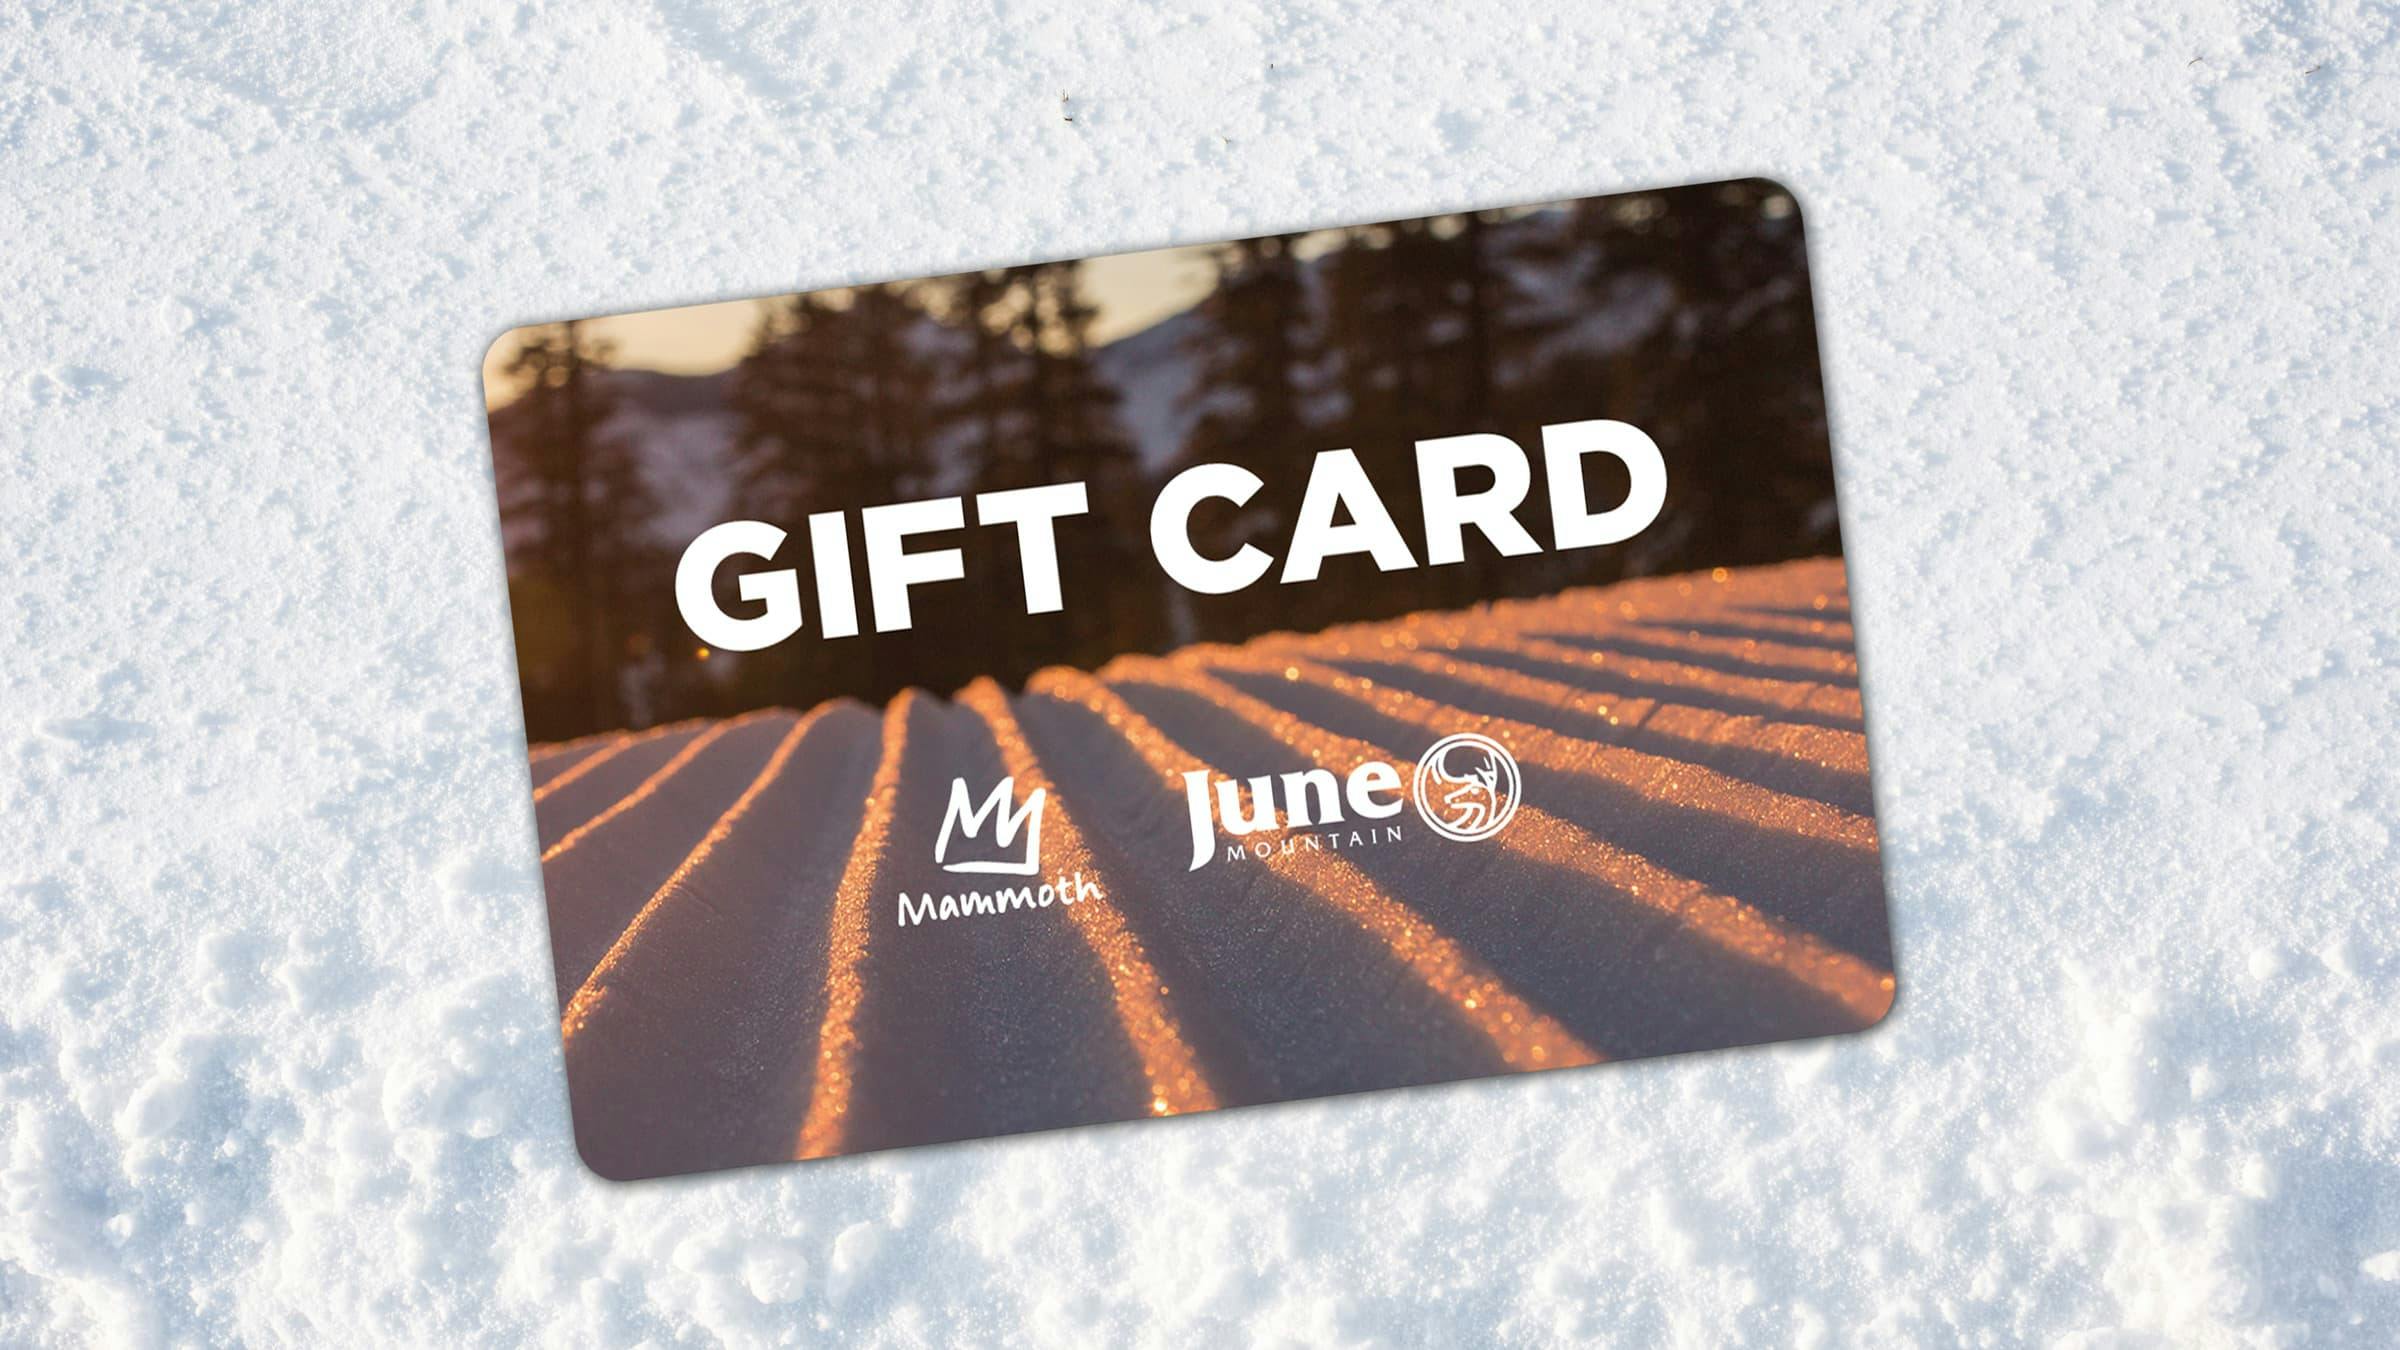 Mammoth Gift Card on snow